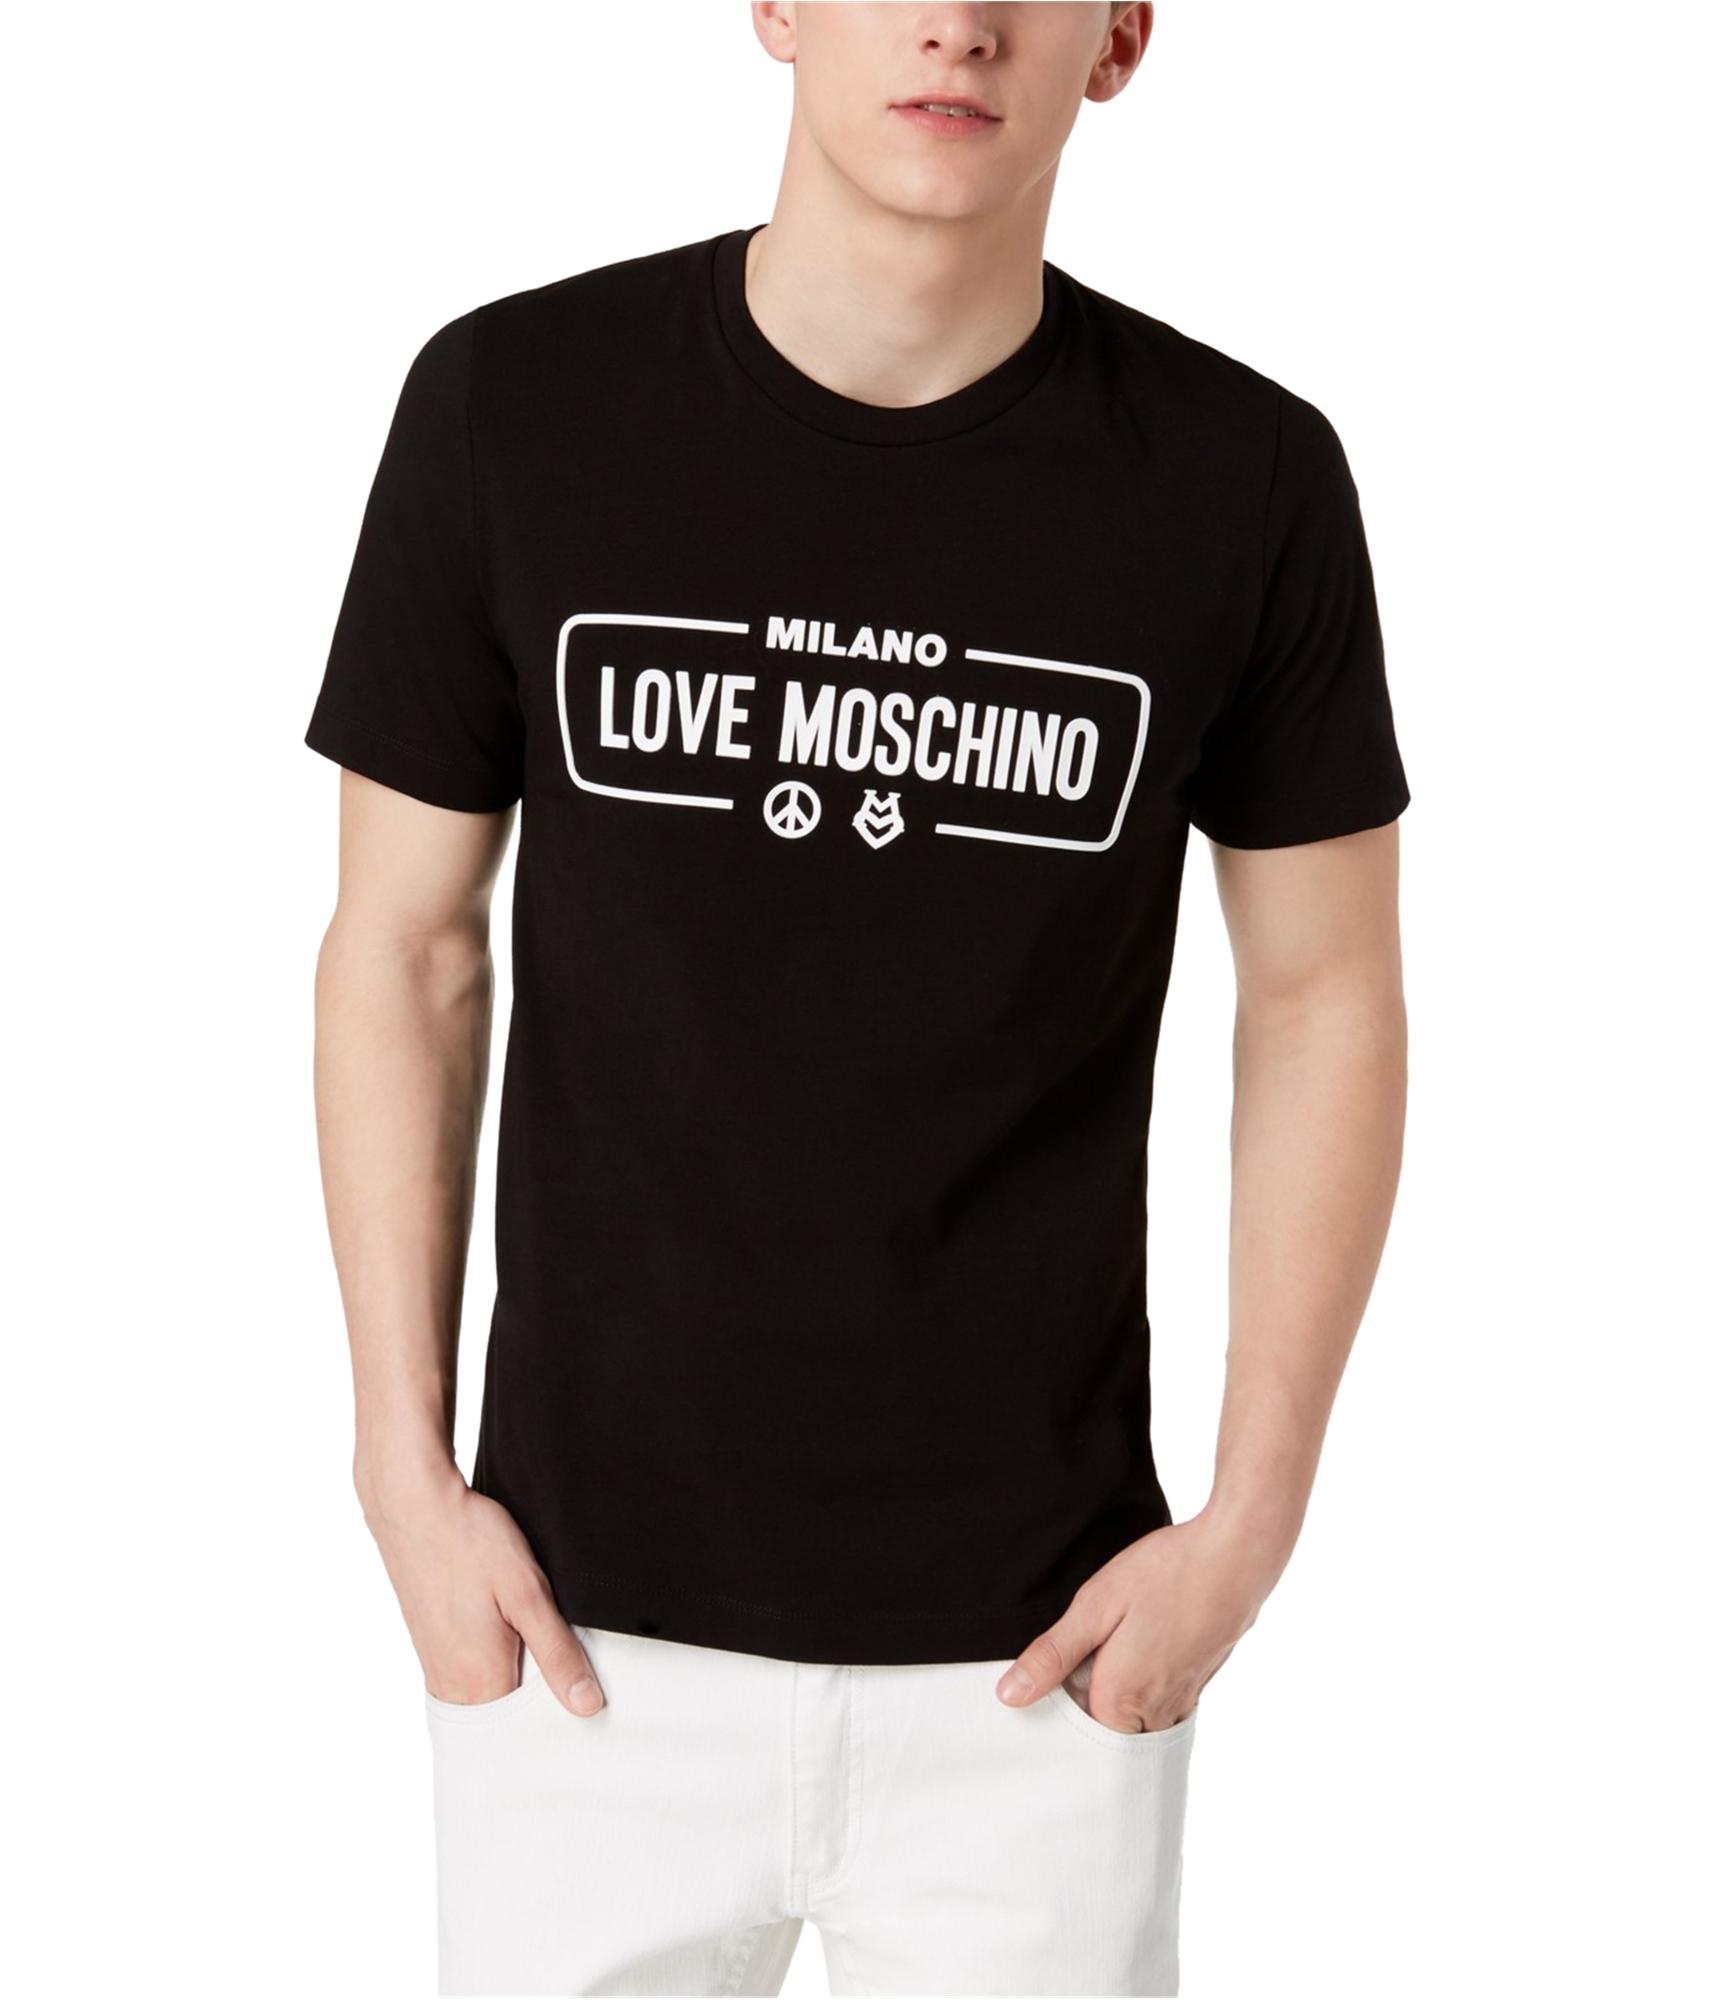 Buy a Mens Love Moschino Milano Graphic T-Shirt Online |